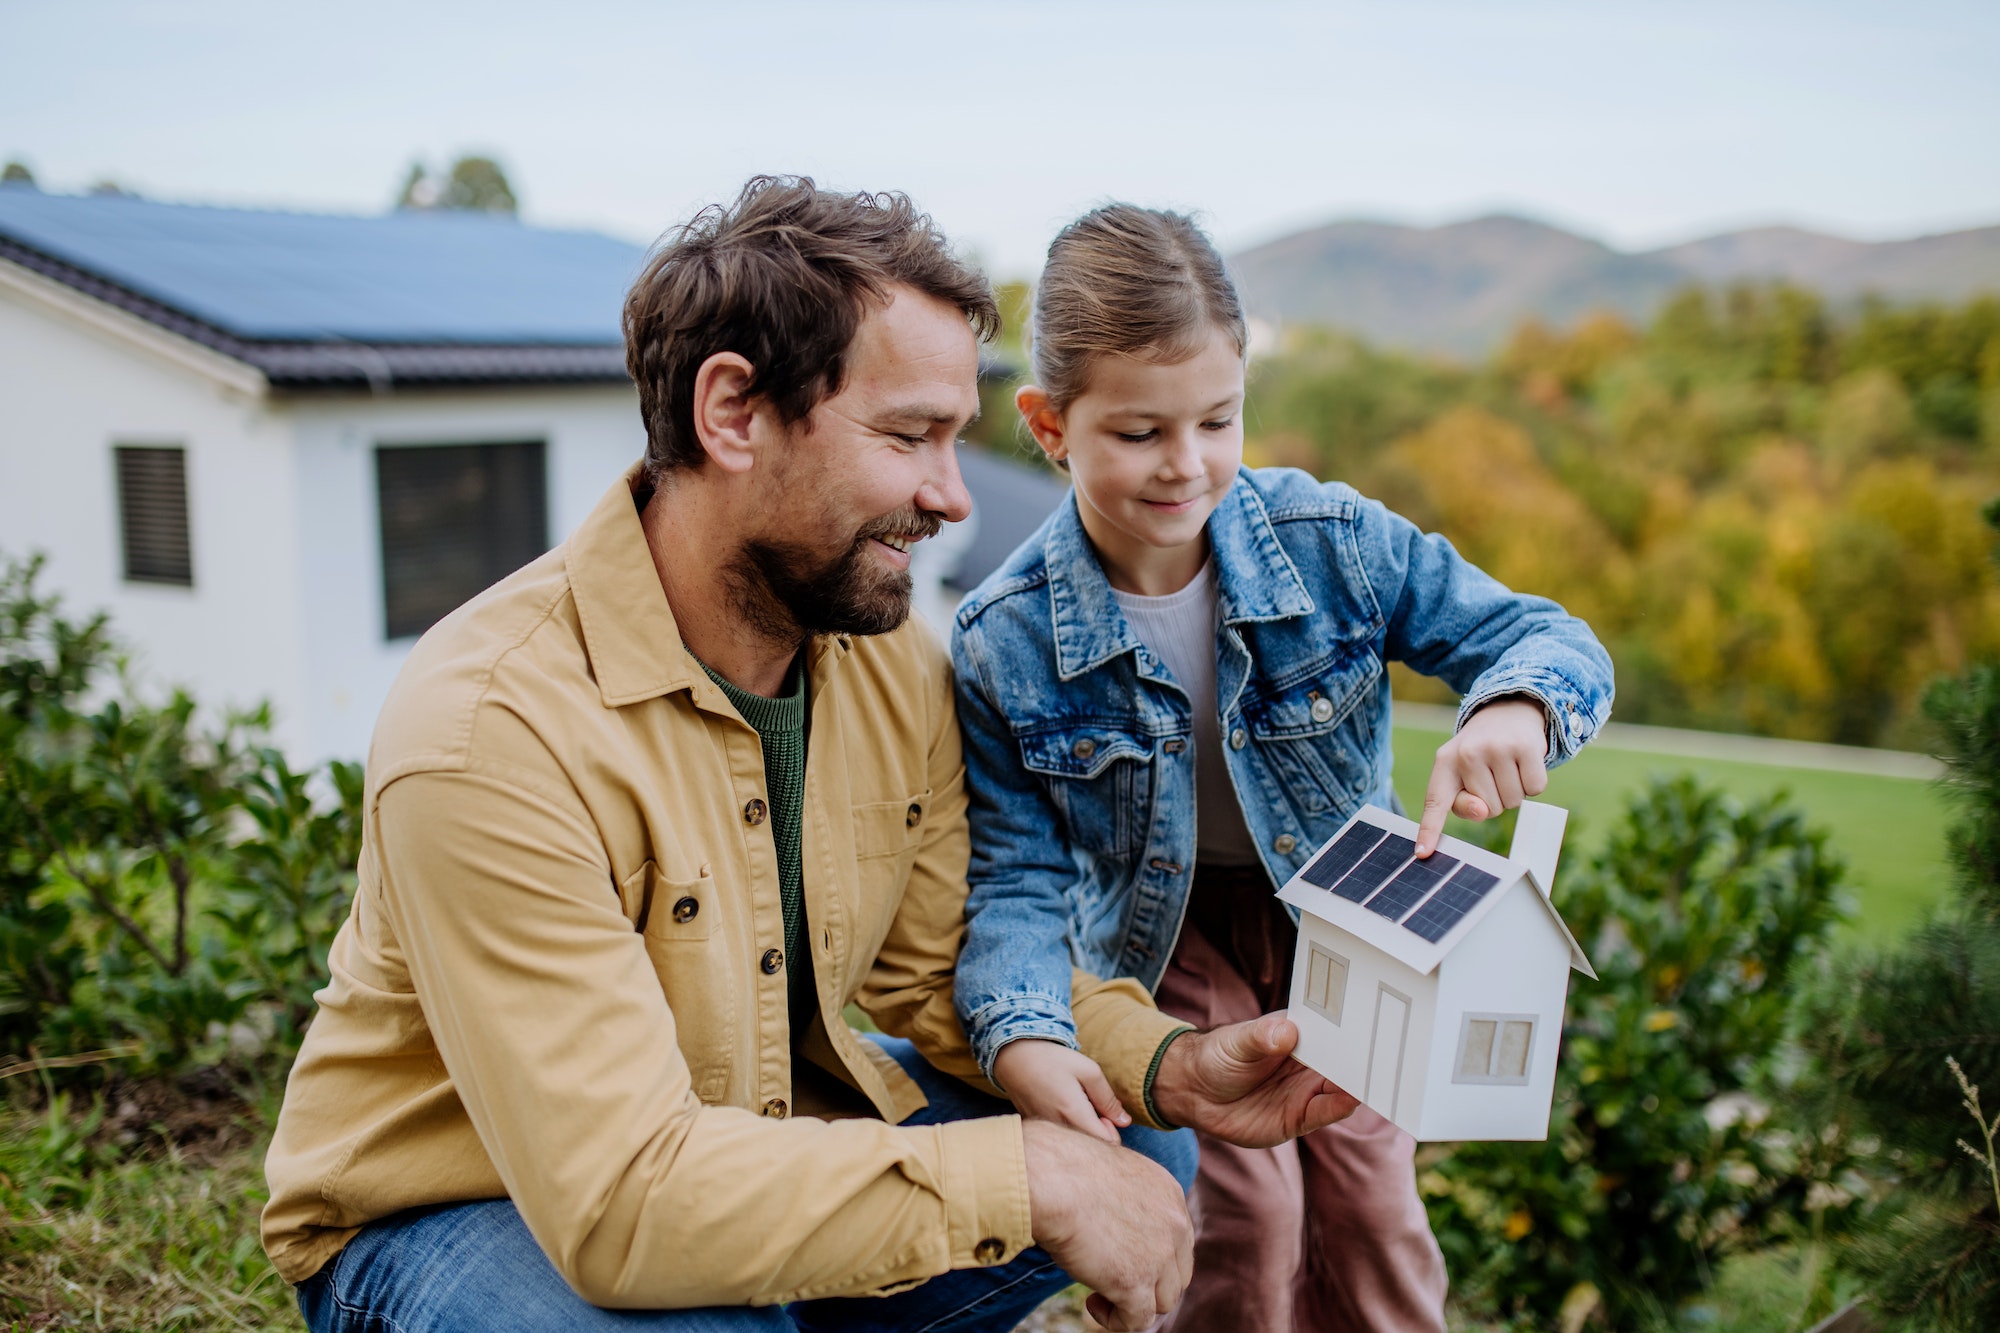 Little girl with her dad holding paper model of house with solar panels, explaining how it works